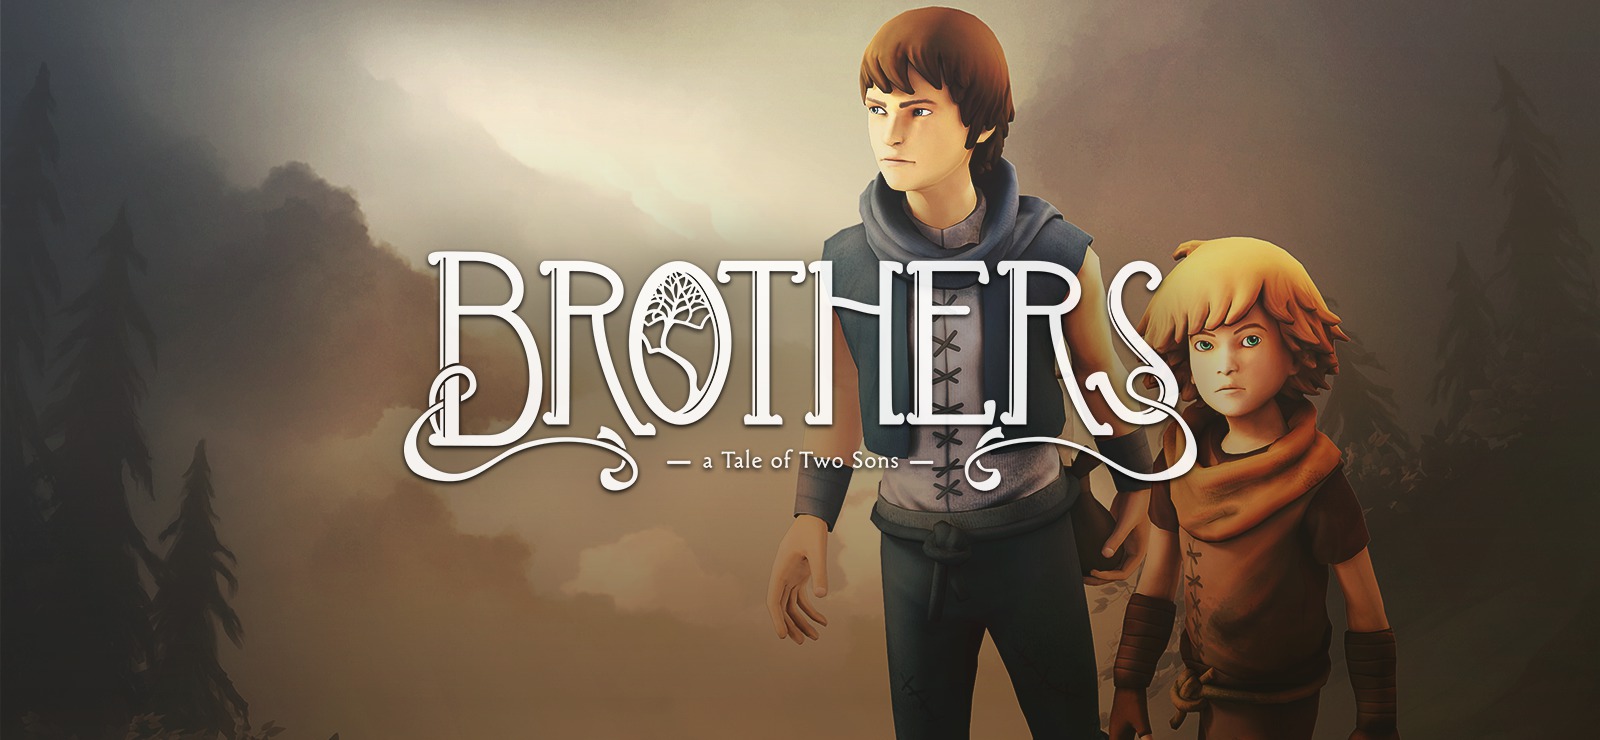 Brothers - A Tale of Two Sons #1 (упоротое прохождение).